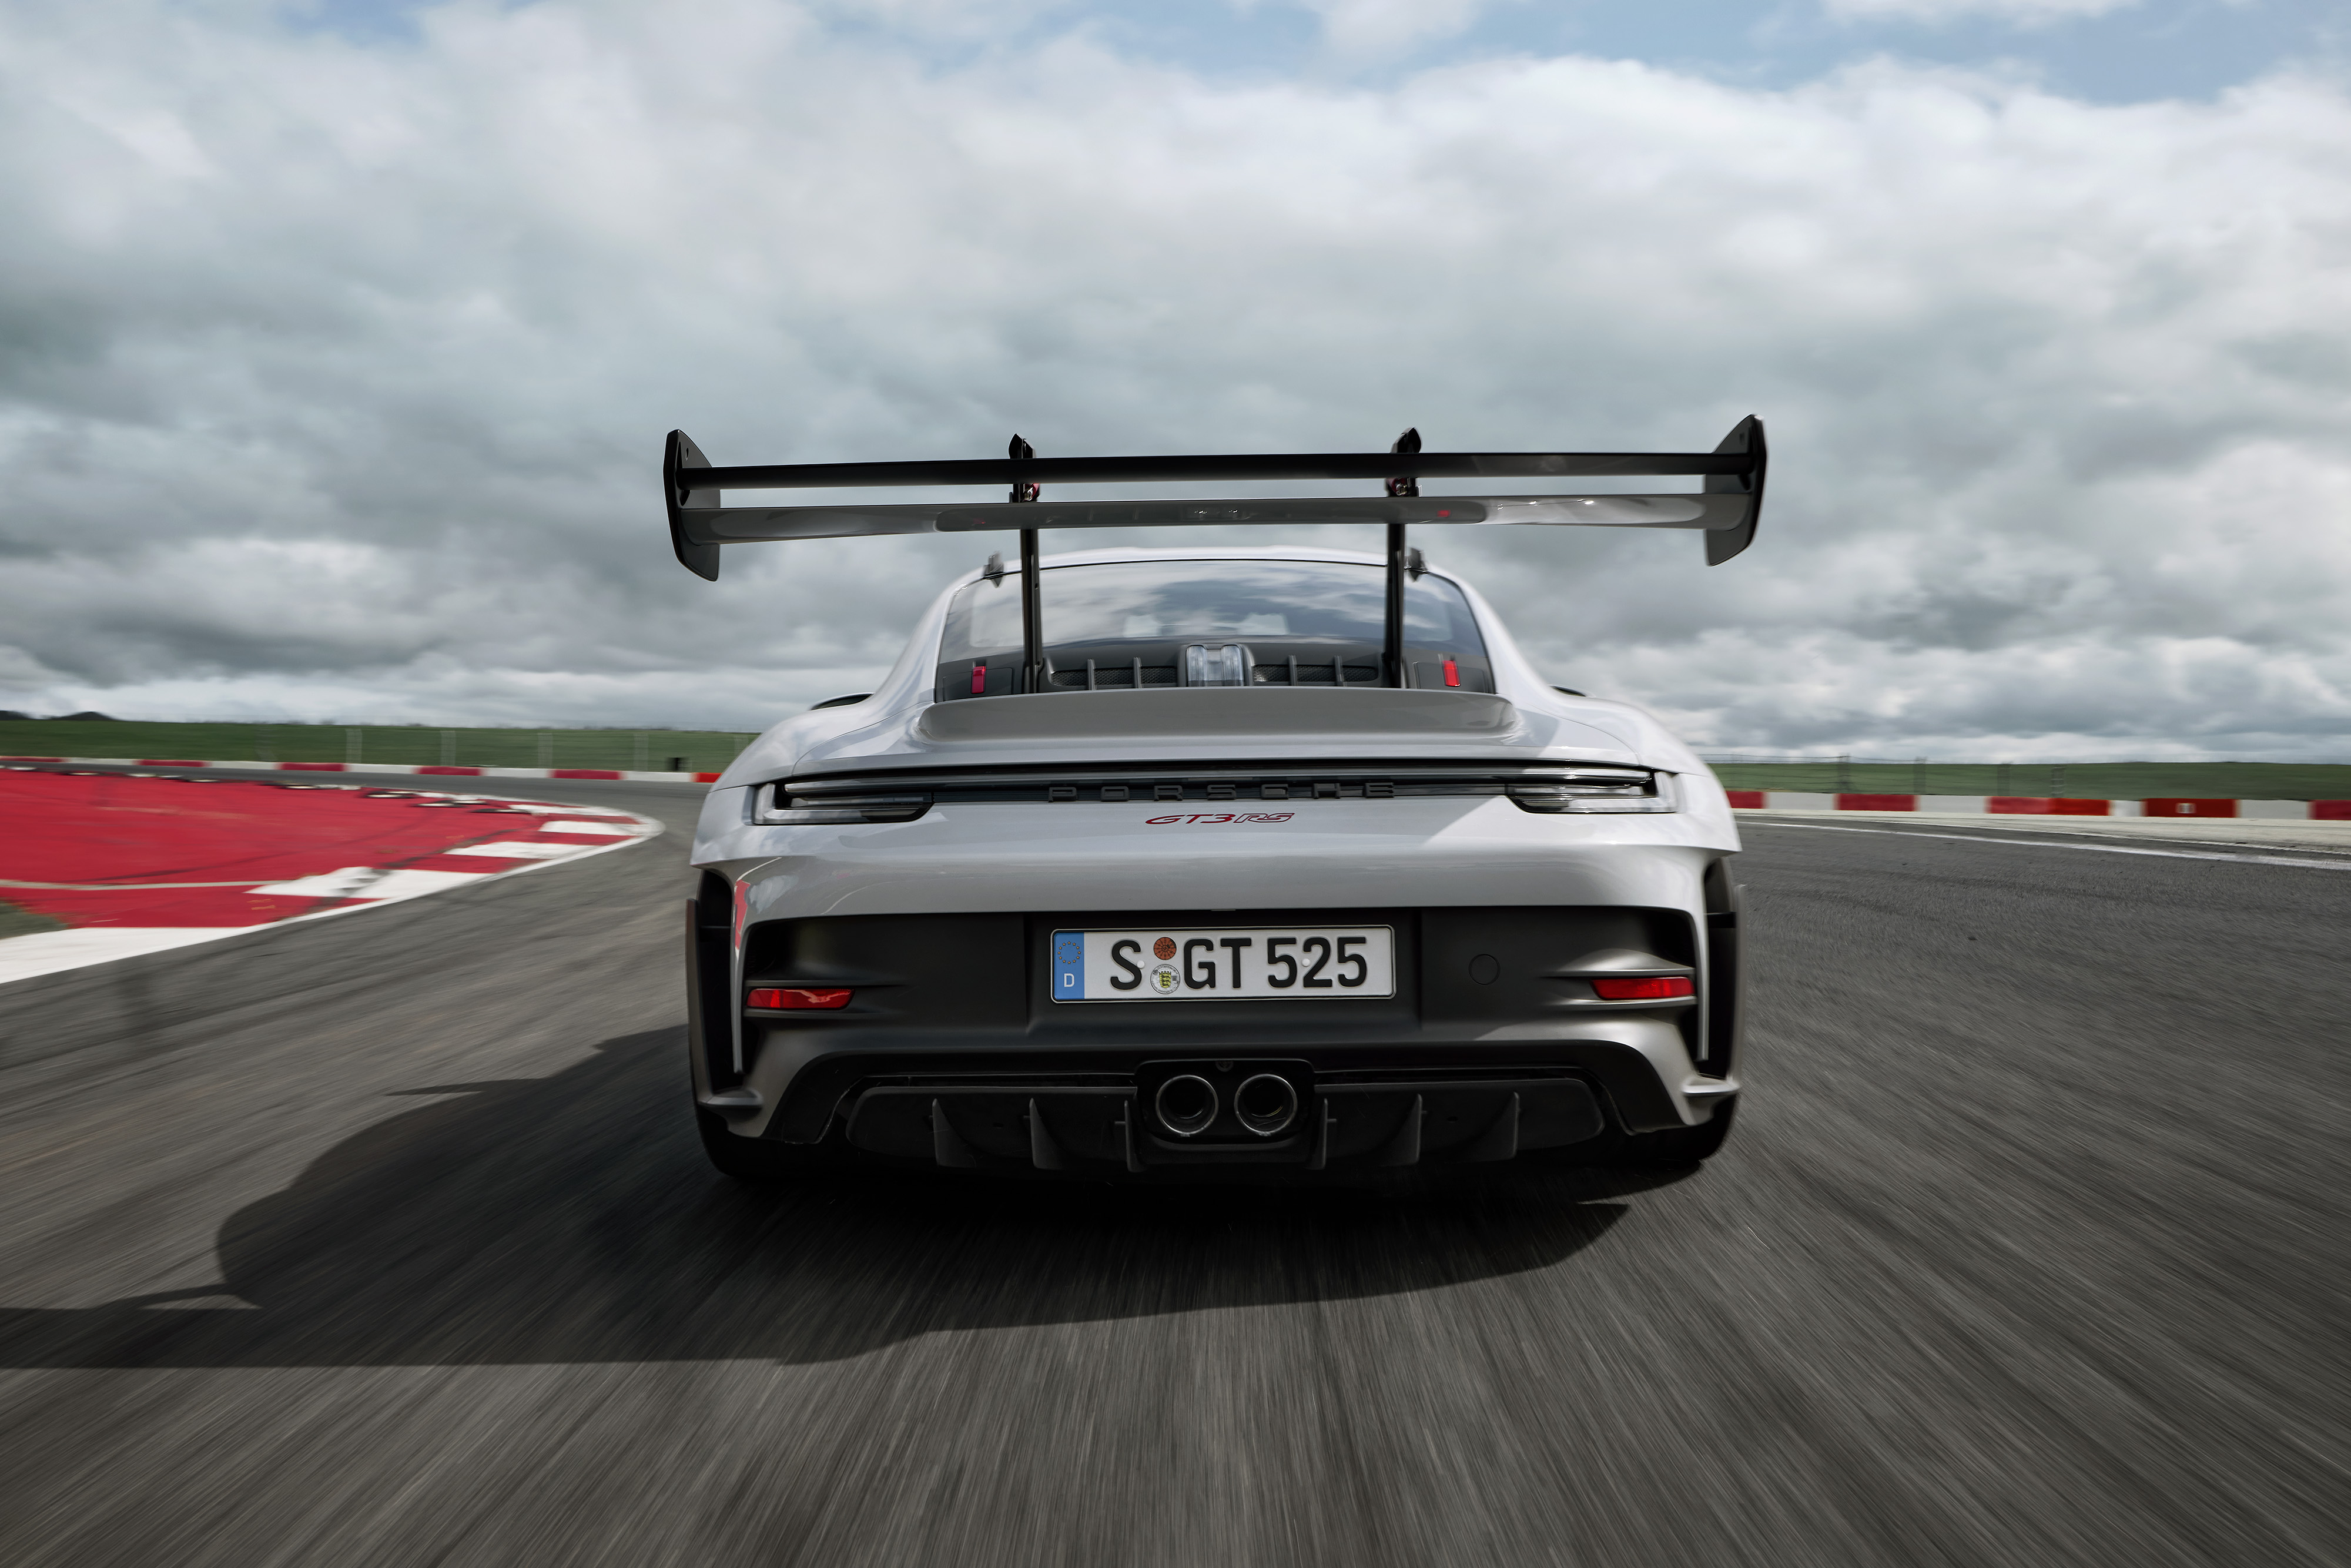 Rear view of a Porsche 992 GT3 RS on track